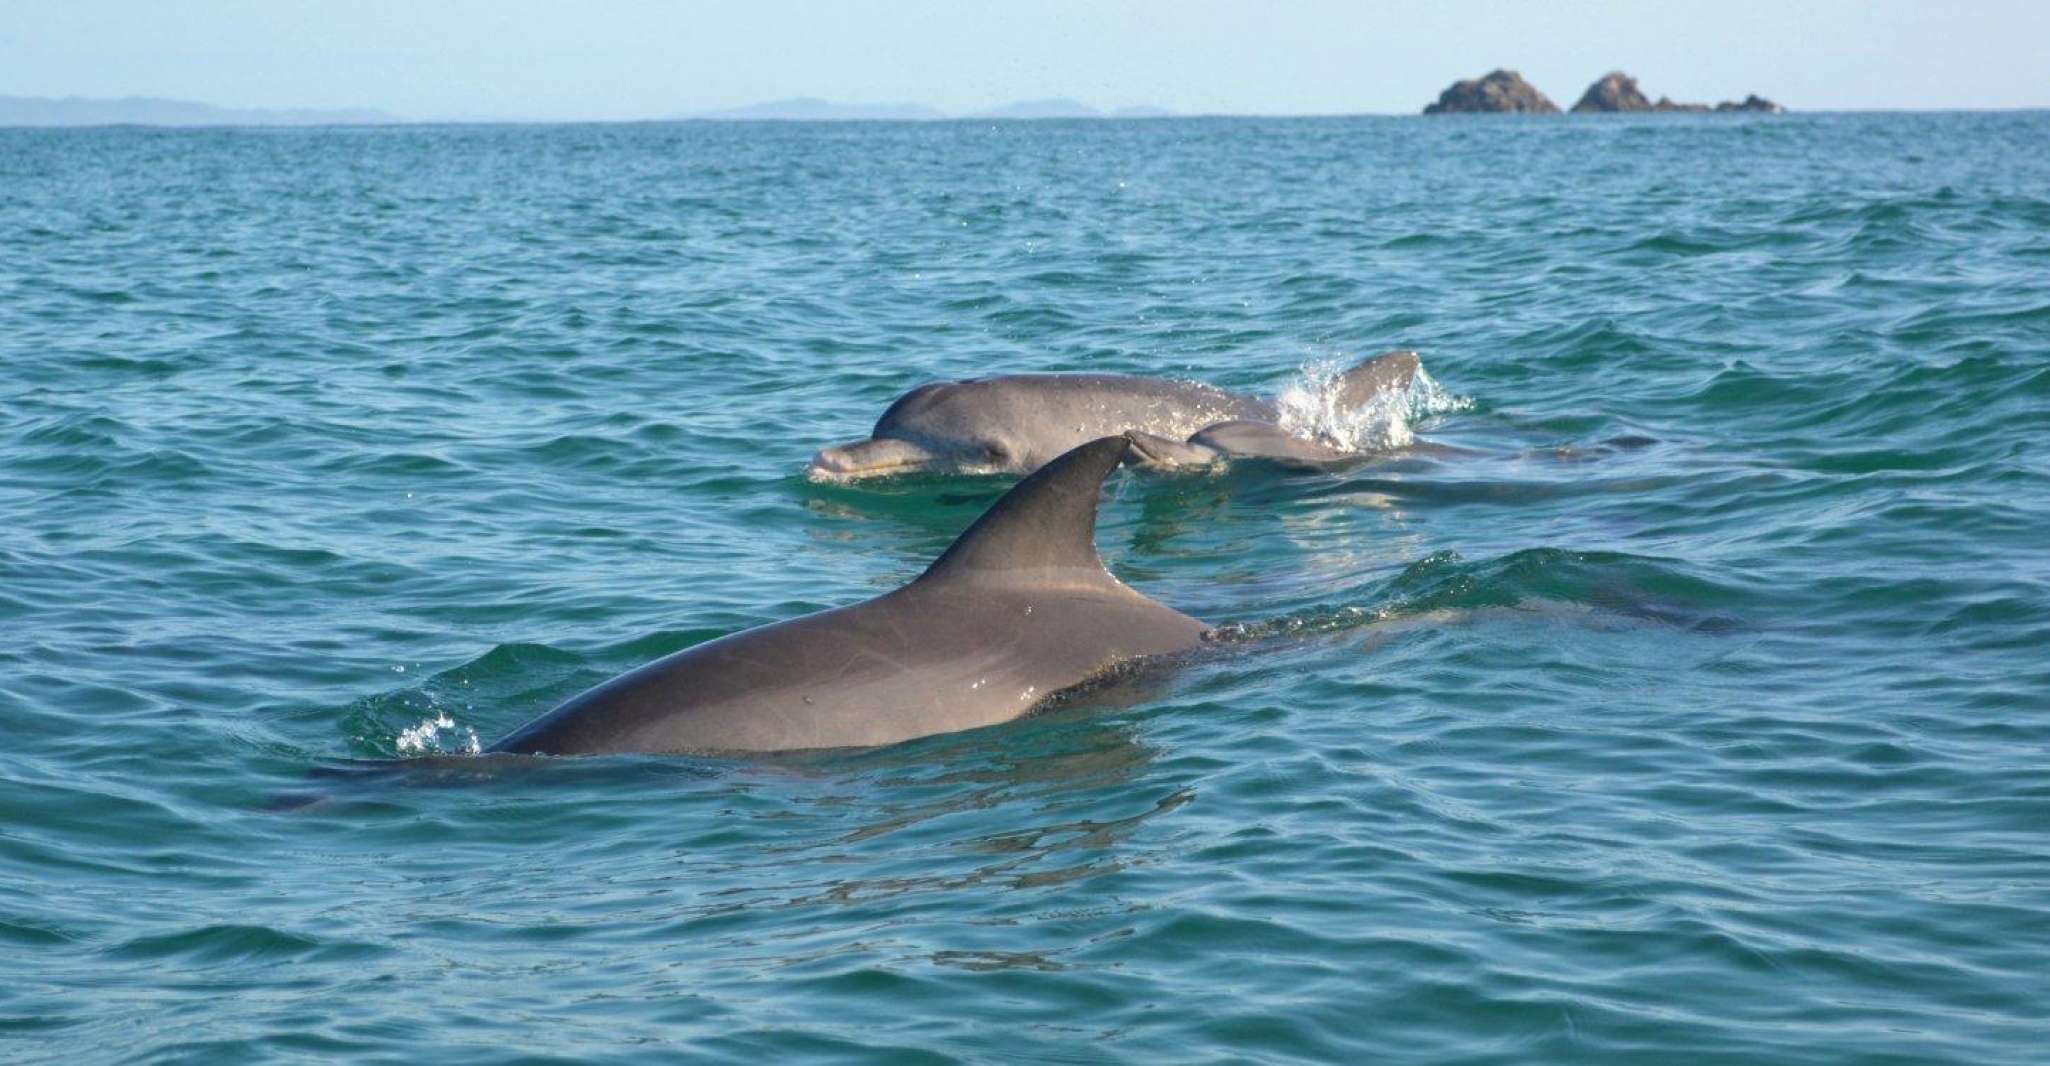 Byron Bay, Sea Kayak Tour with Dolphins and Turtles - Housity